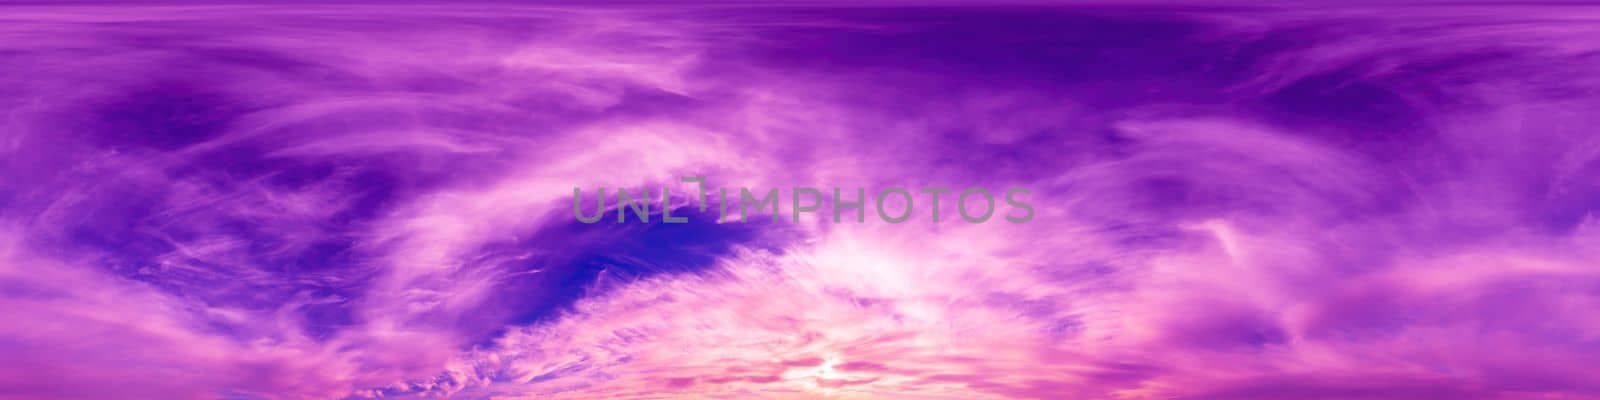 Panorama of a dark blue magenta sunset sky with golden Cumulus clouds. Seamless hdr 360 panorama in spherical equiangular format. Full zenith for 3D visualization, sky replacement for aerial drone panoramas. by Matiunina